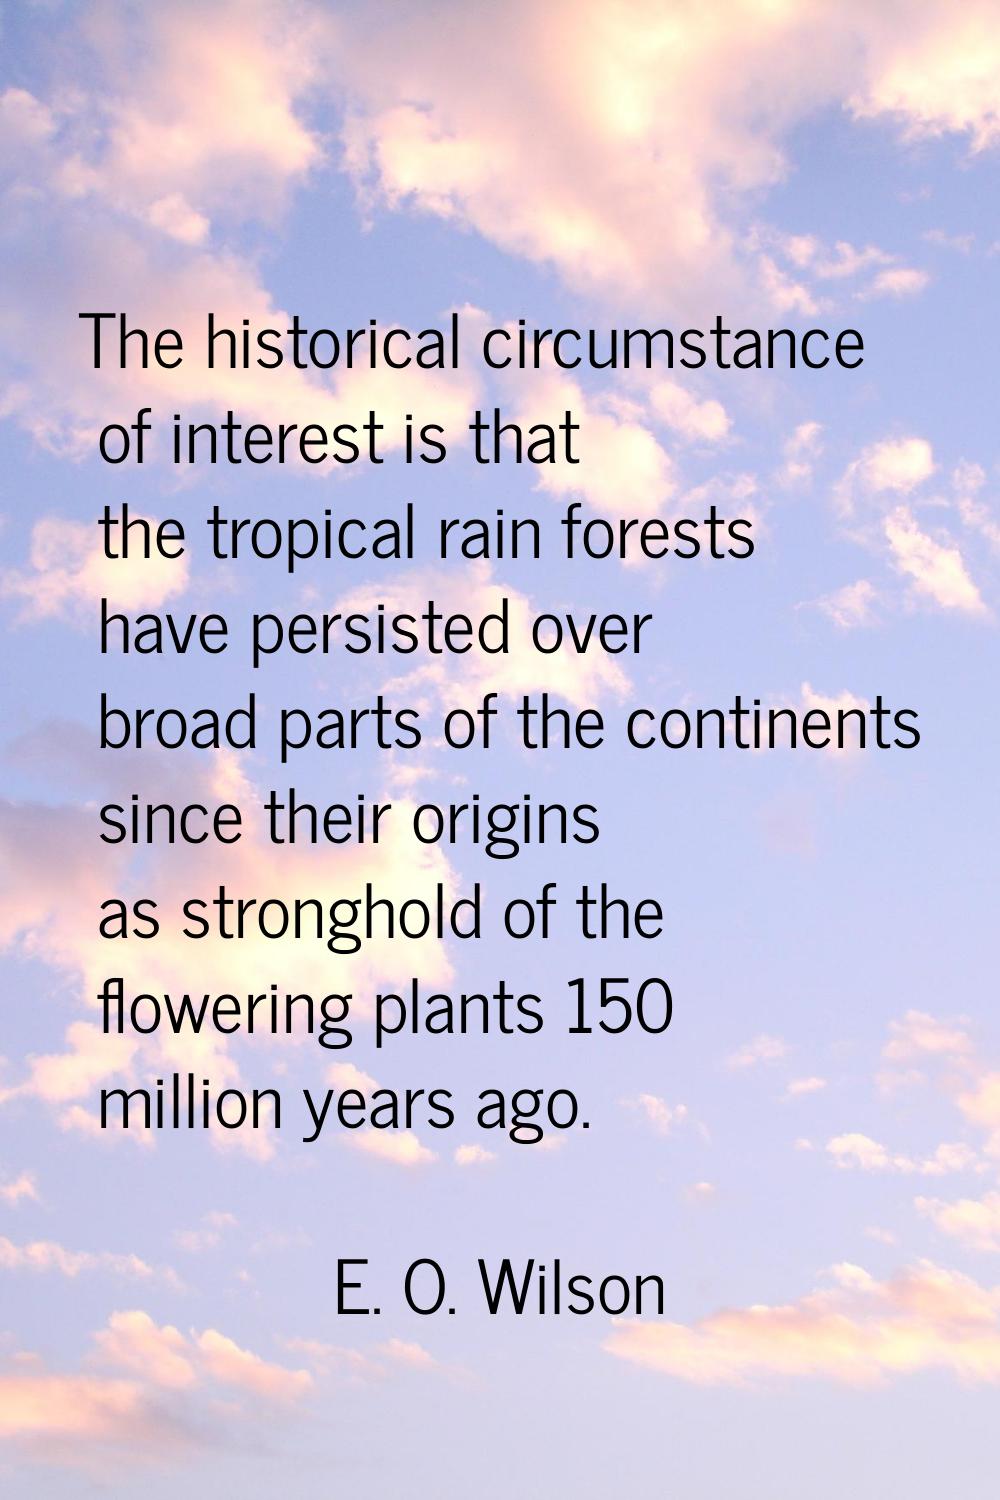 The historical circumstance of interest is that the tropical rain forests have persisted over broad